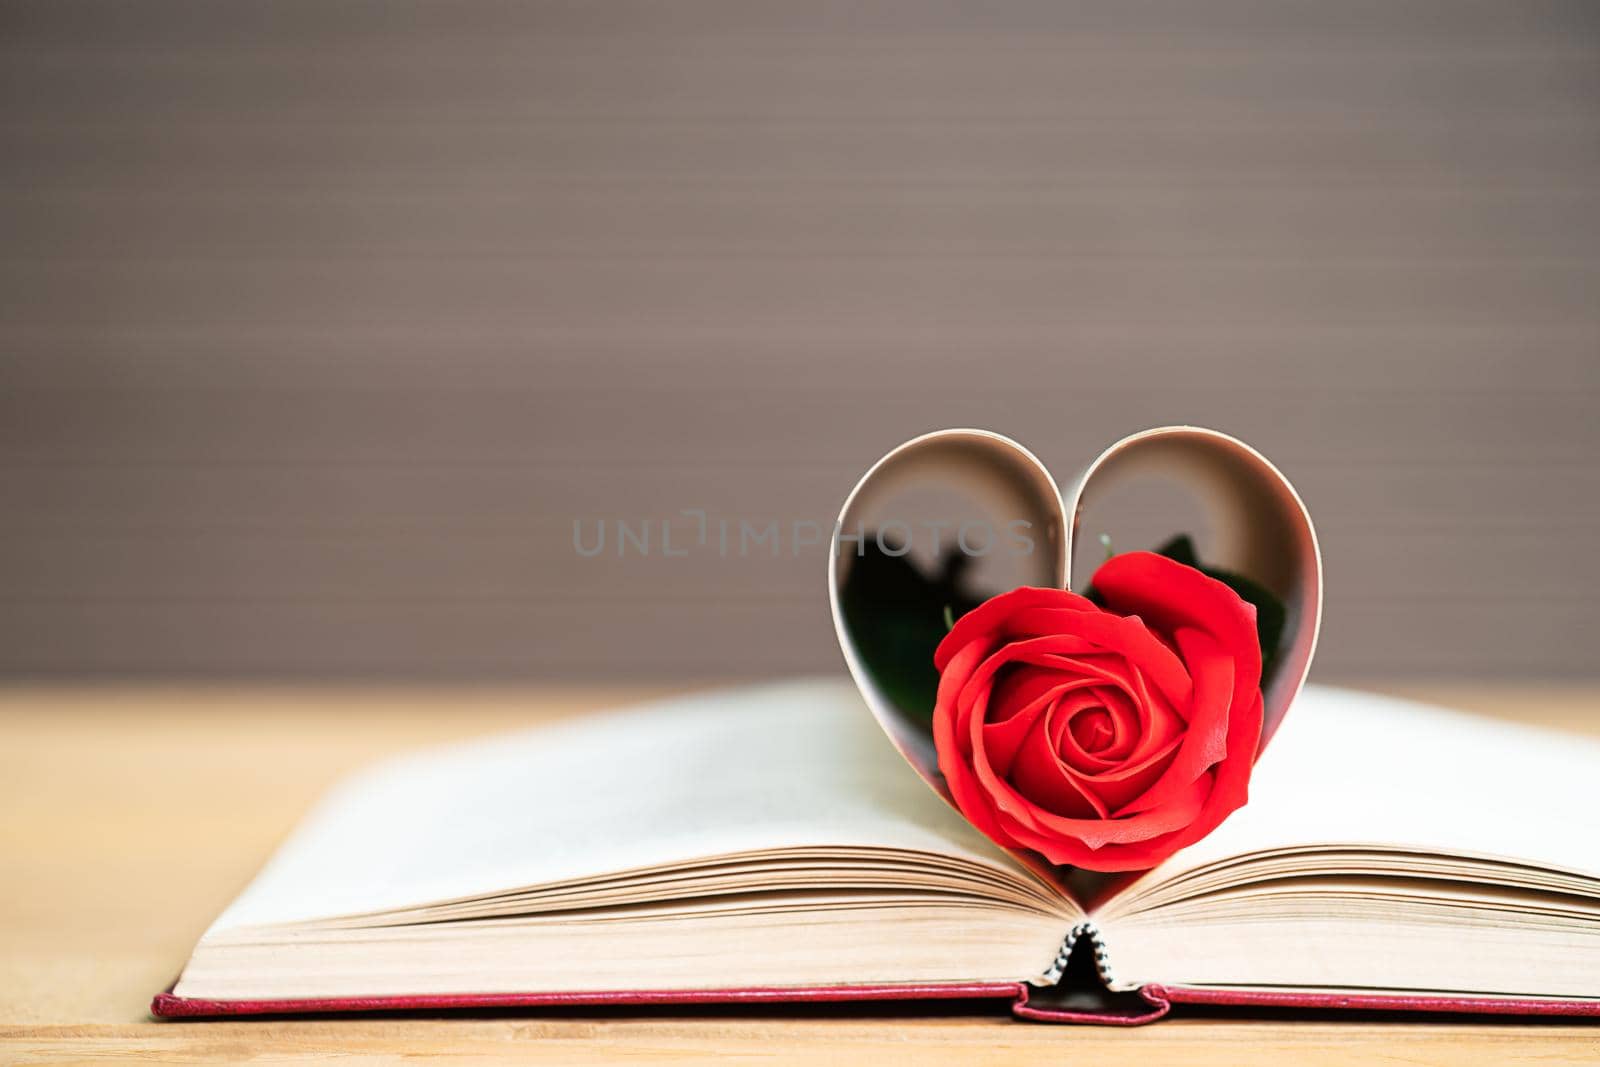 Pages of book curved into a heart shape and red rose,Love concept of heart shape from book pages